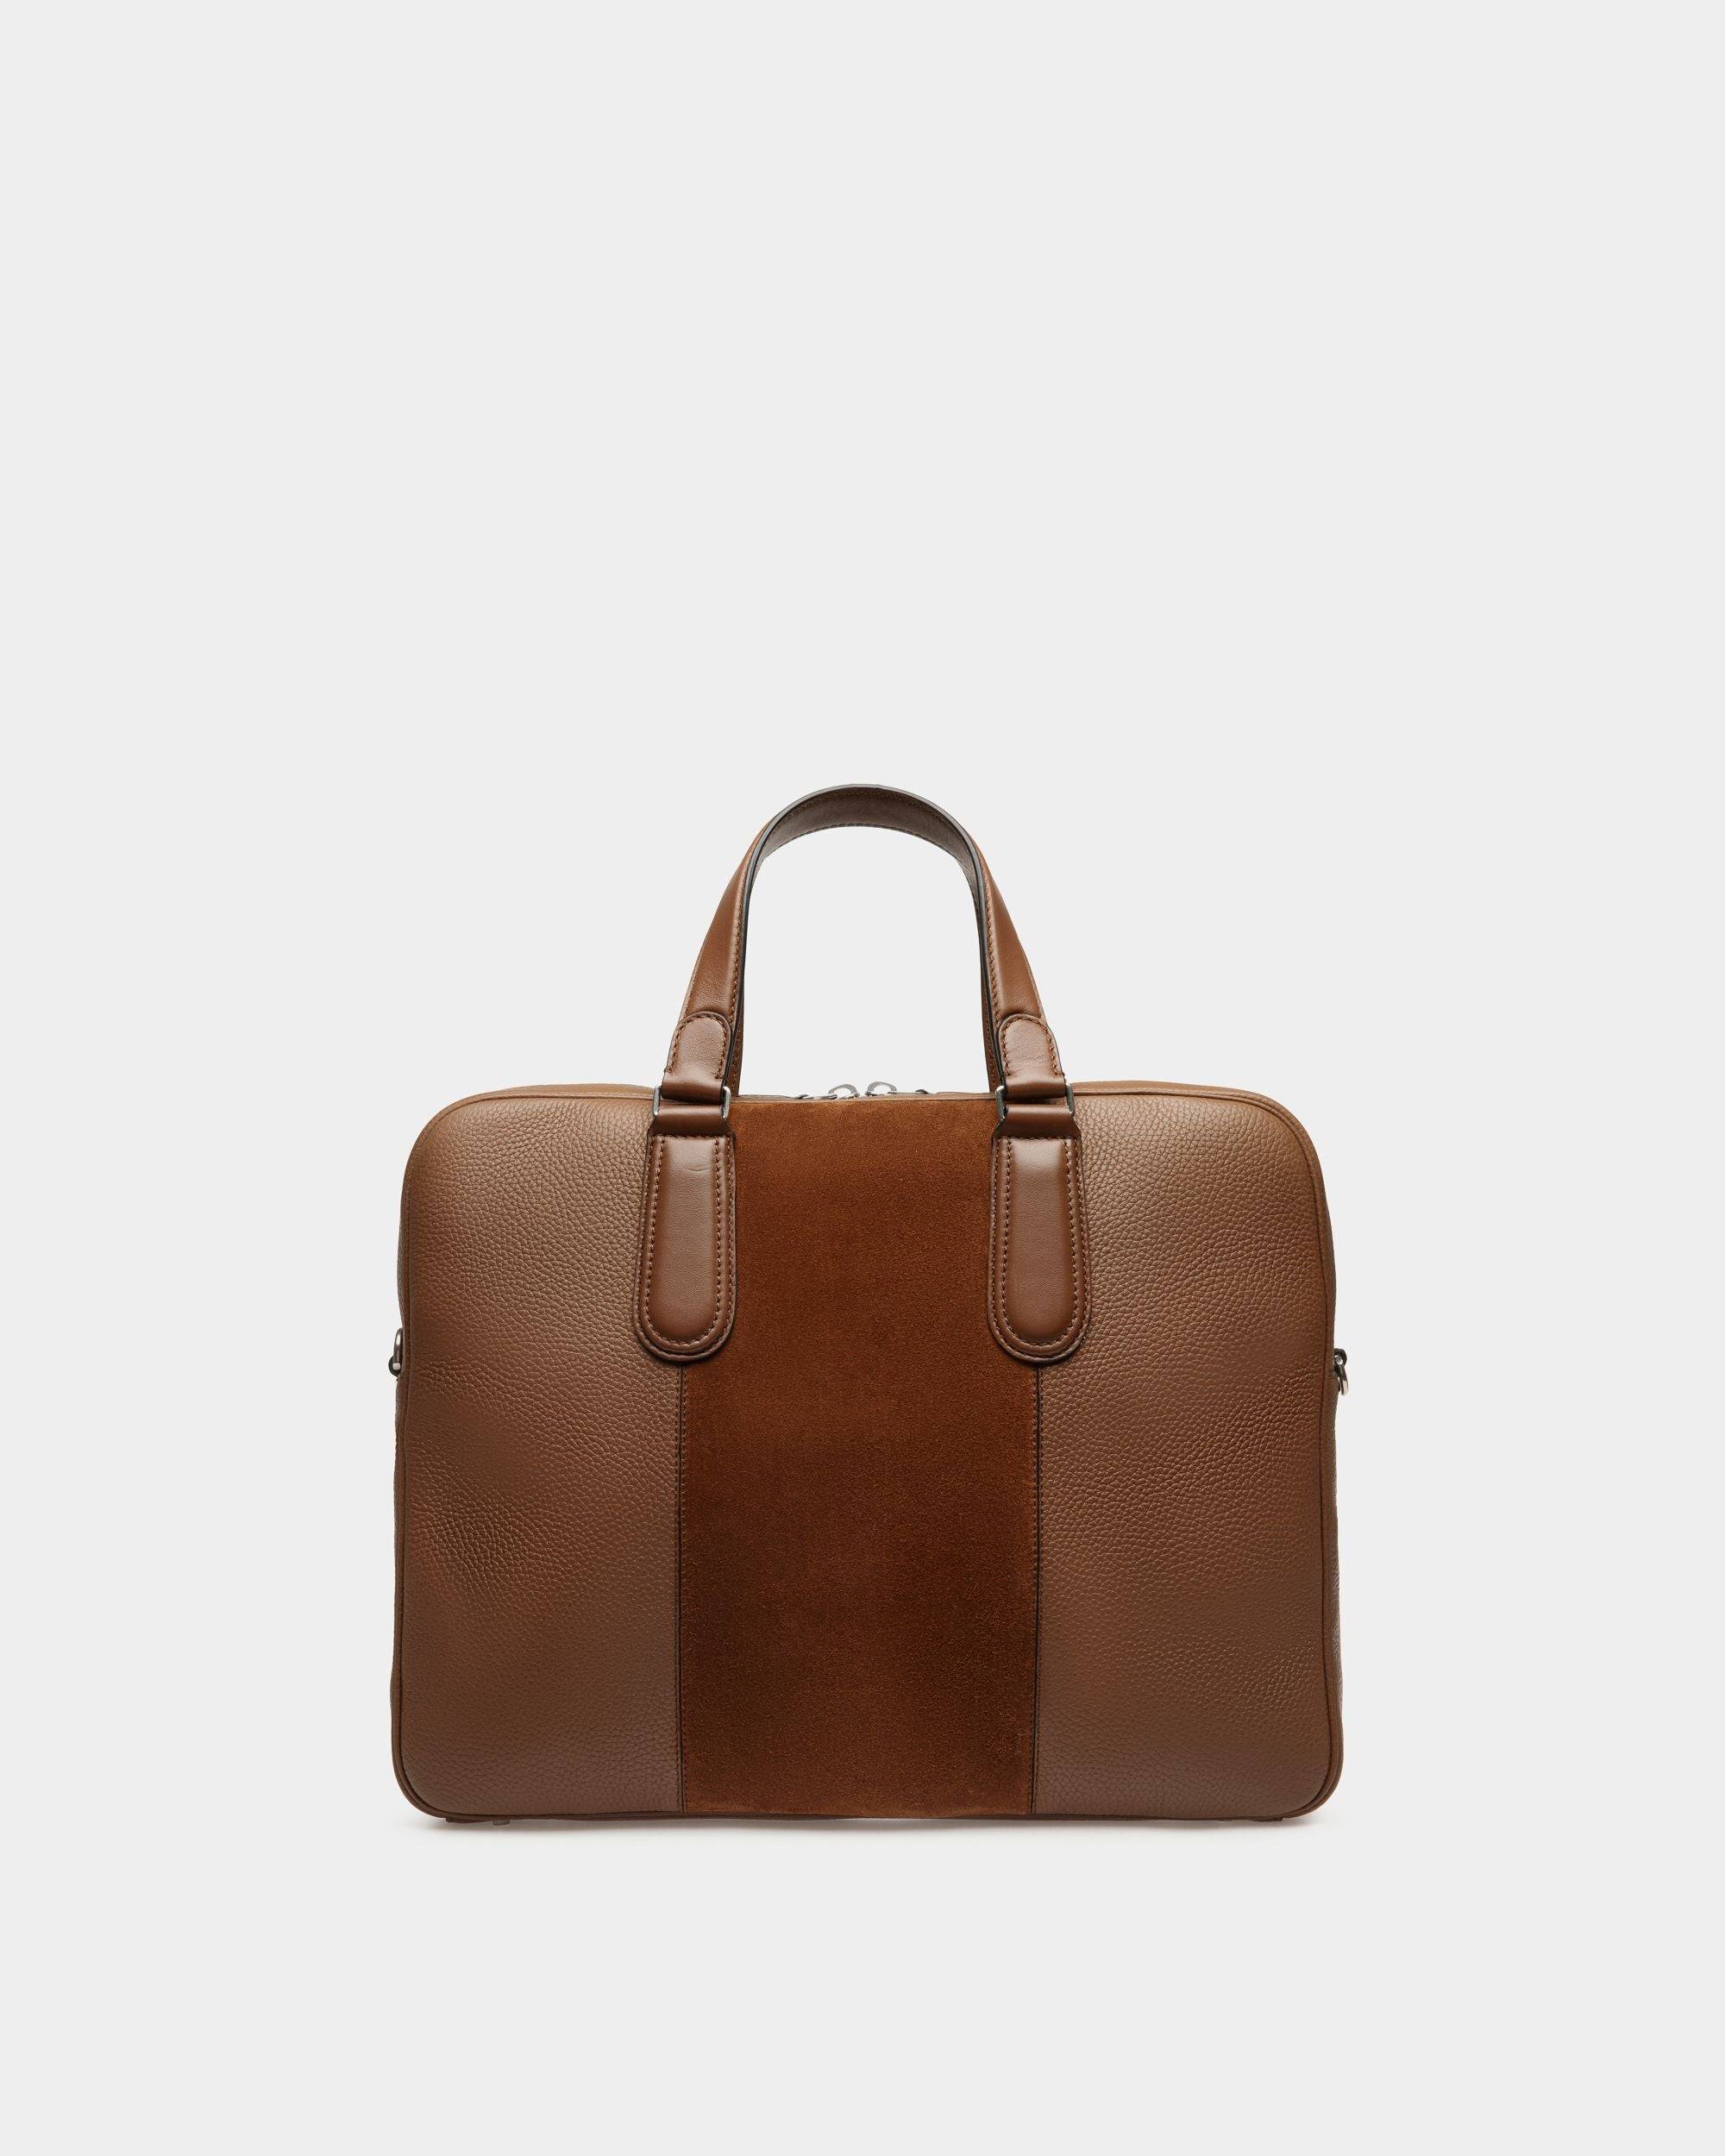 Spin | Men's Briefcase in Brown Leather | Bally | Still Life Back